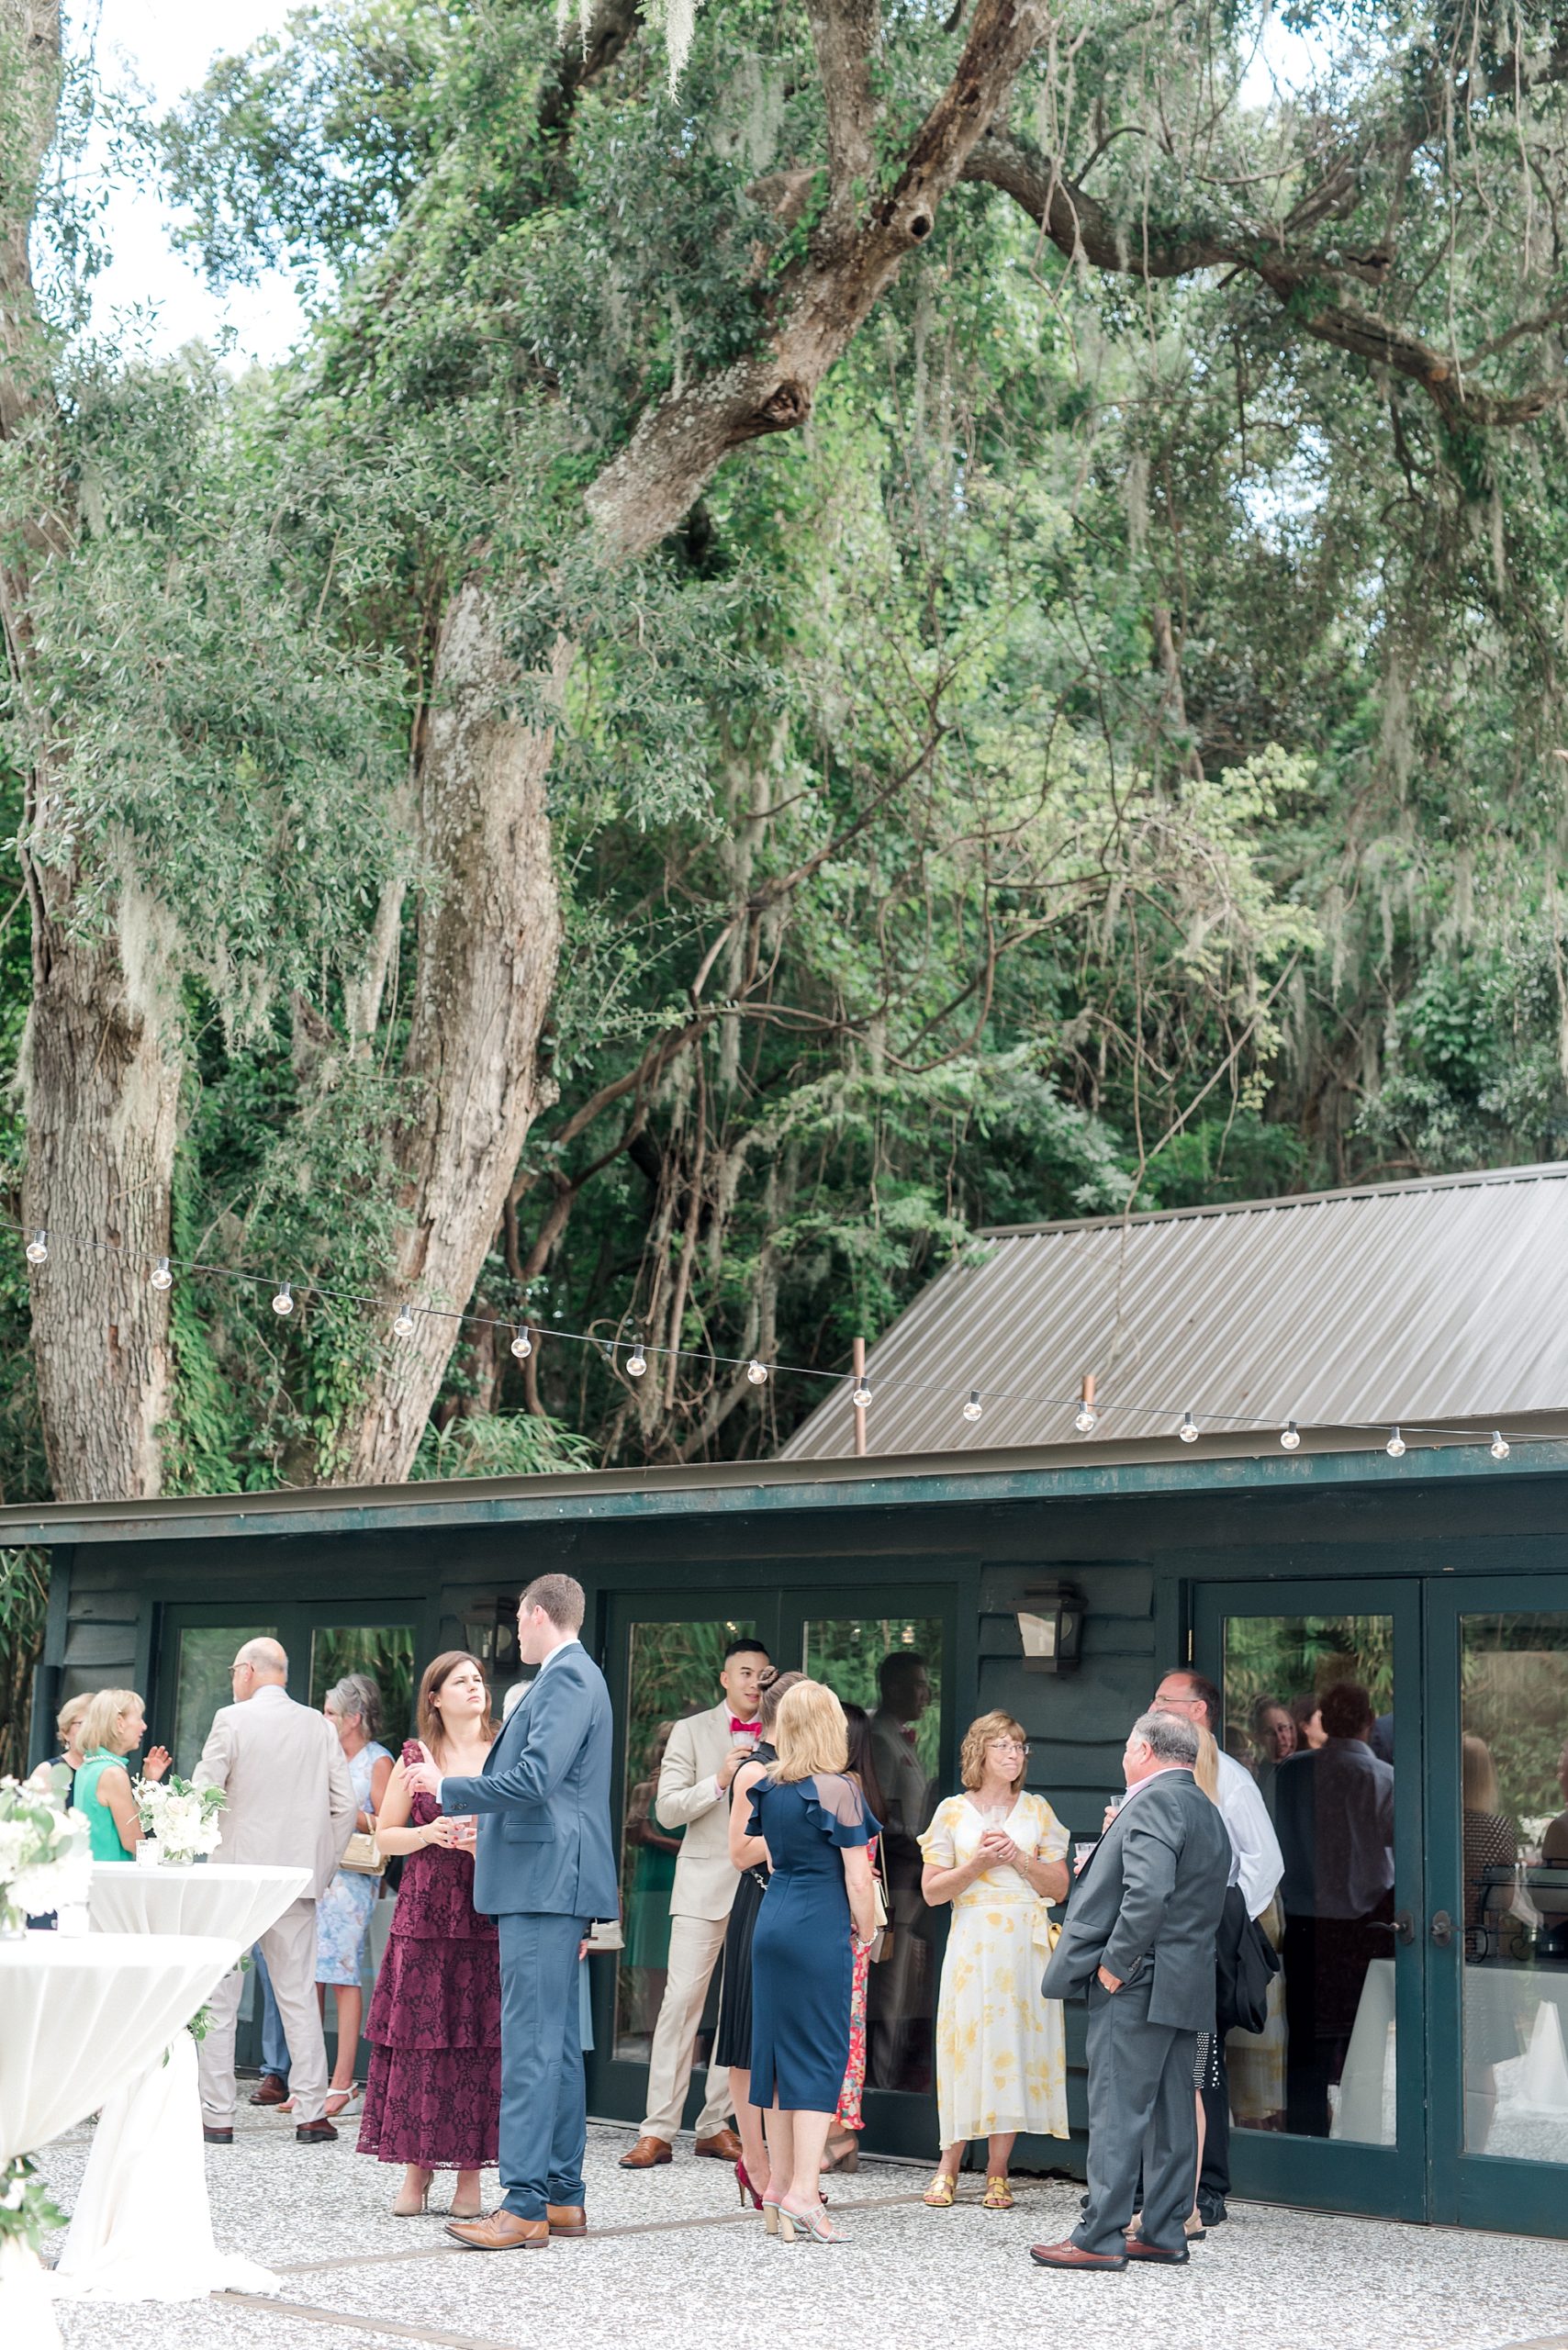 wedding guests mingle on outside patio at Magnolia Plantation and Gardens